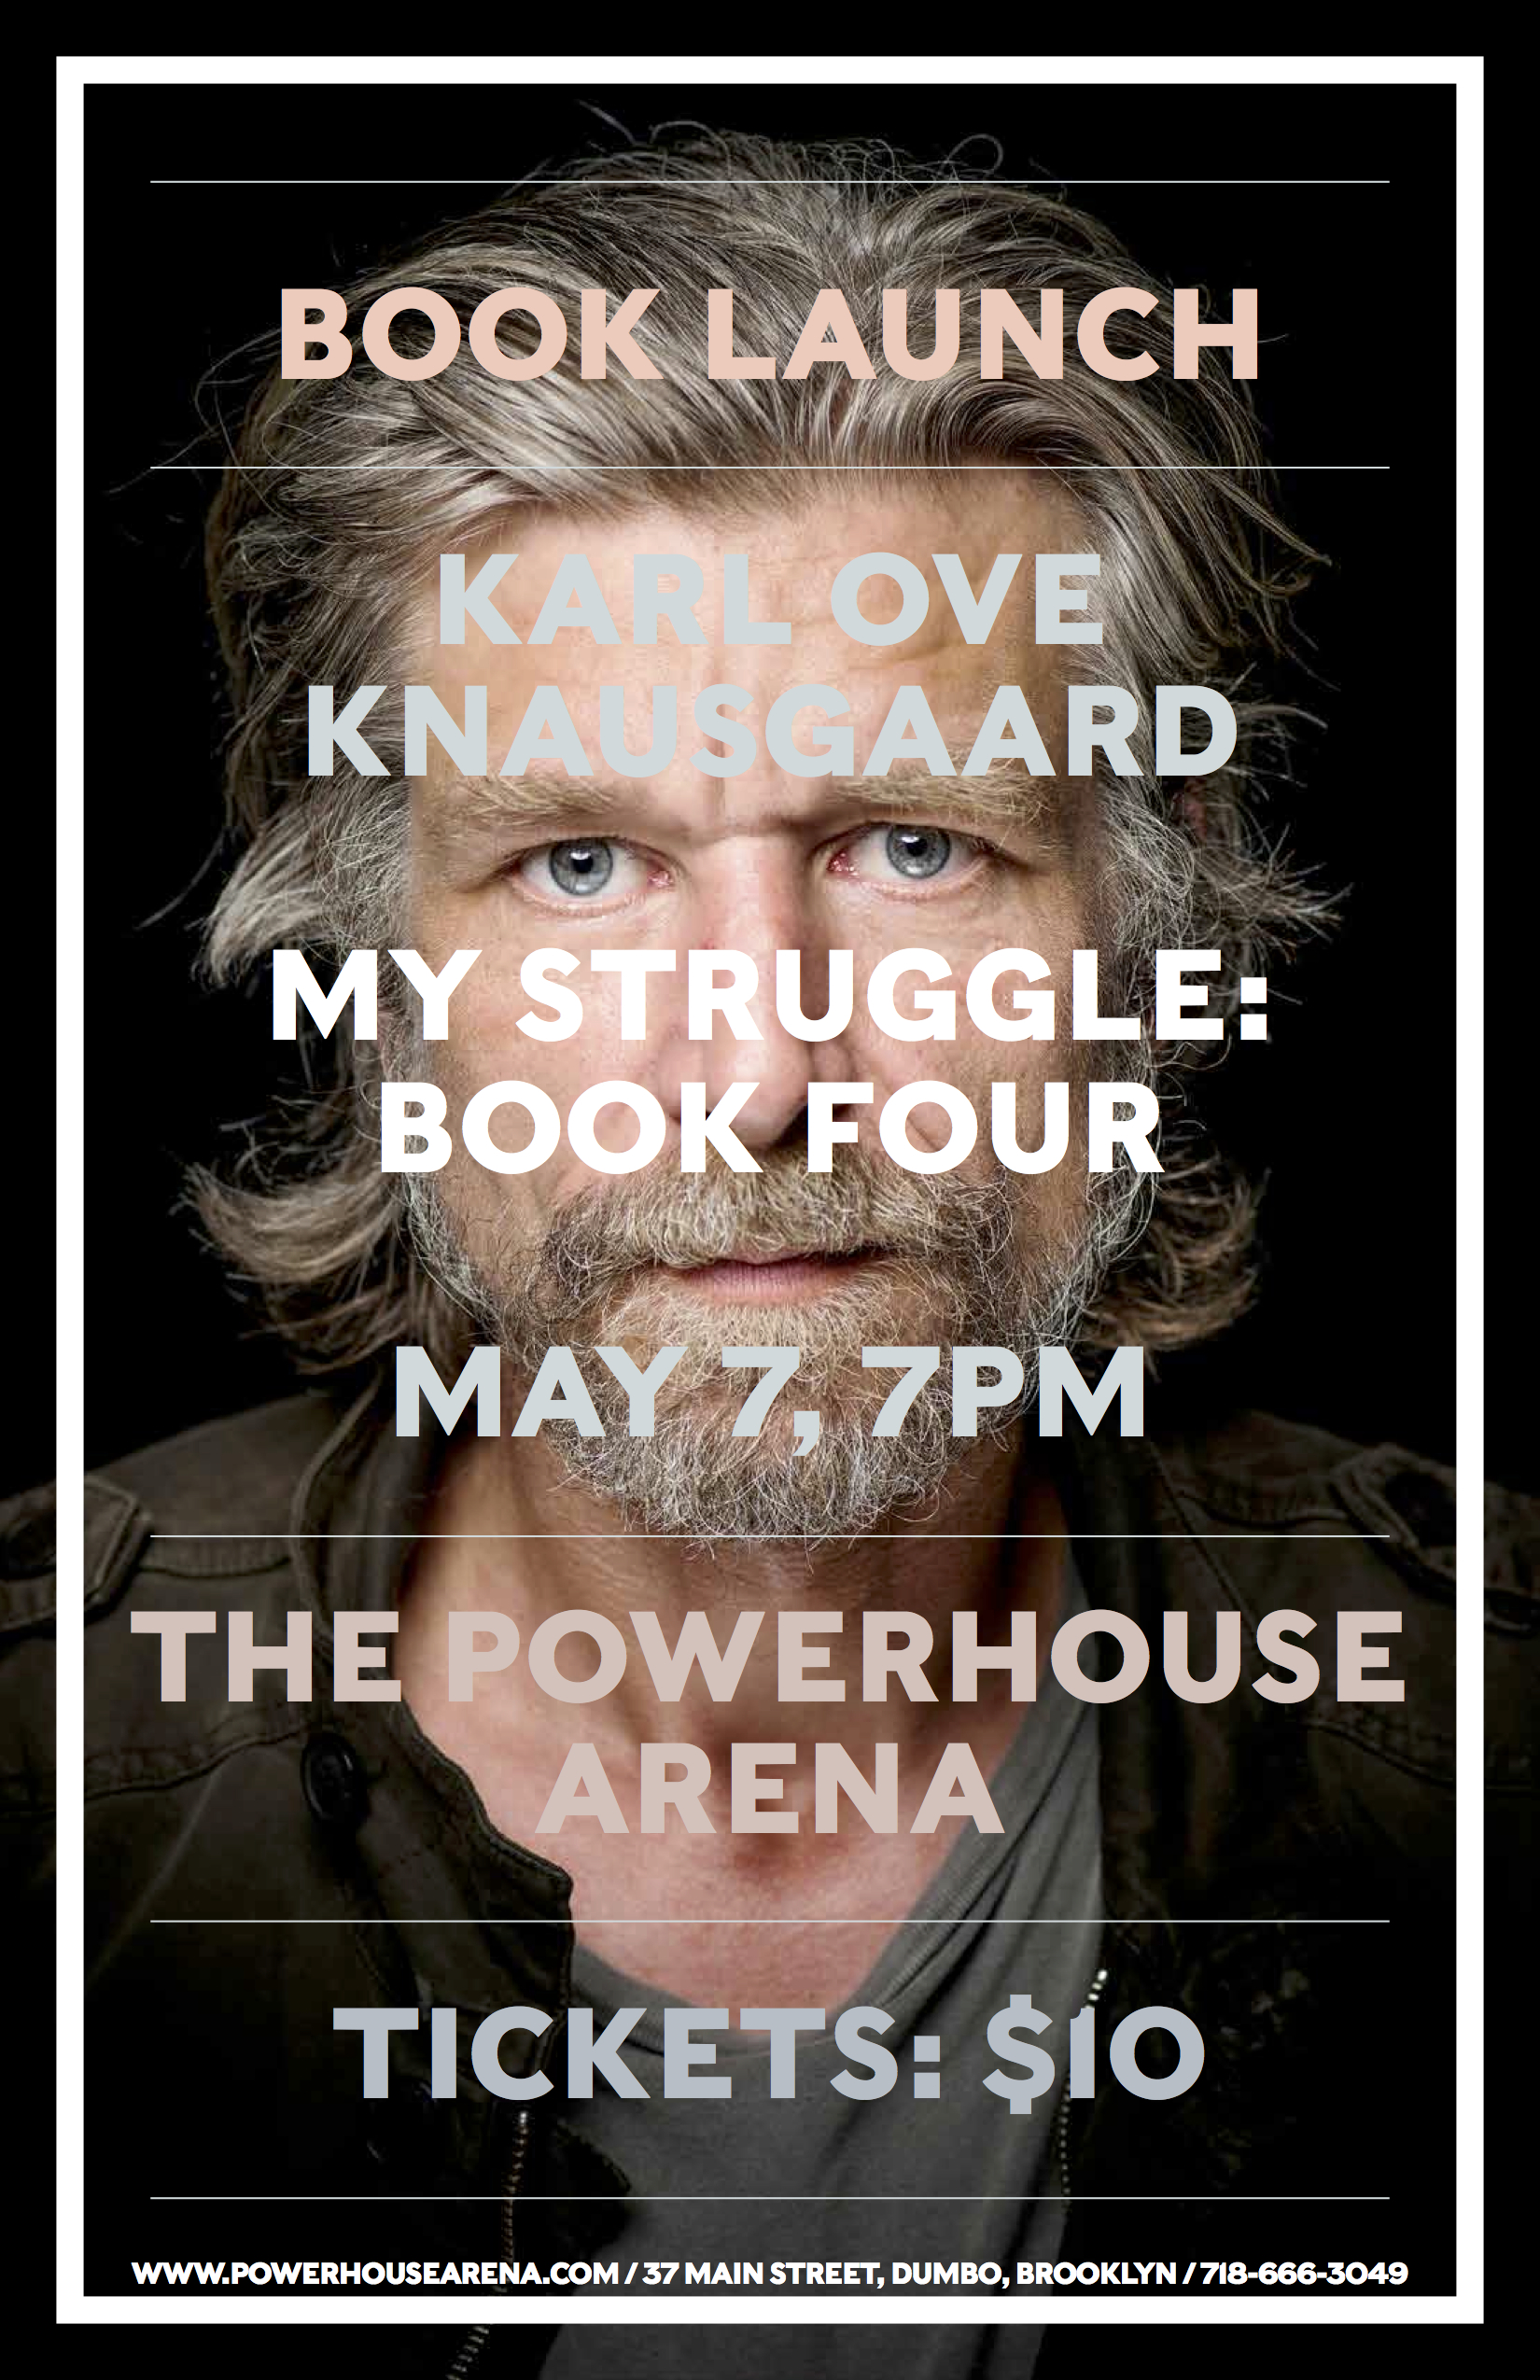 NYC Book Launch: My Struggle: Book Four by Karl Ove Knausgaard with Ben Lerner